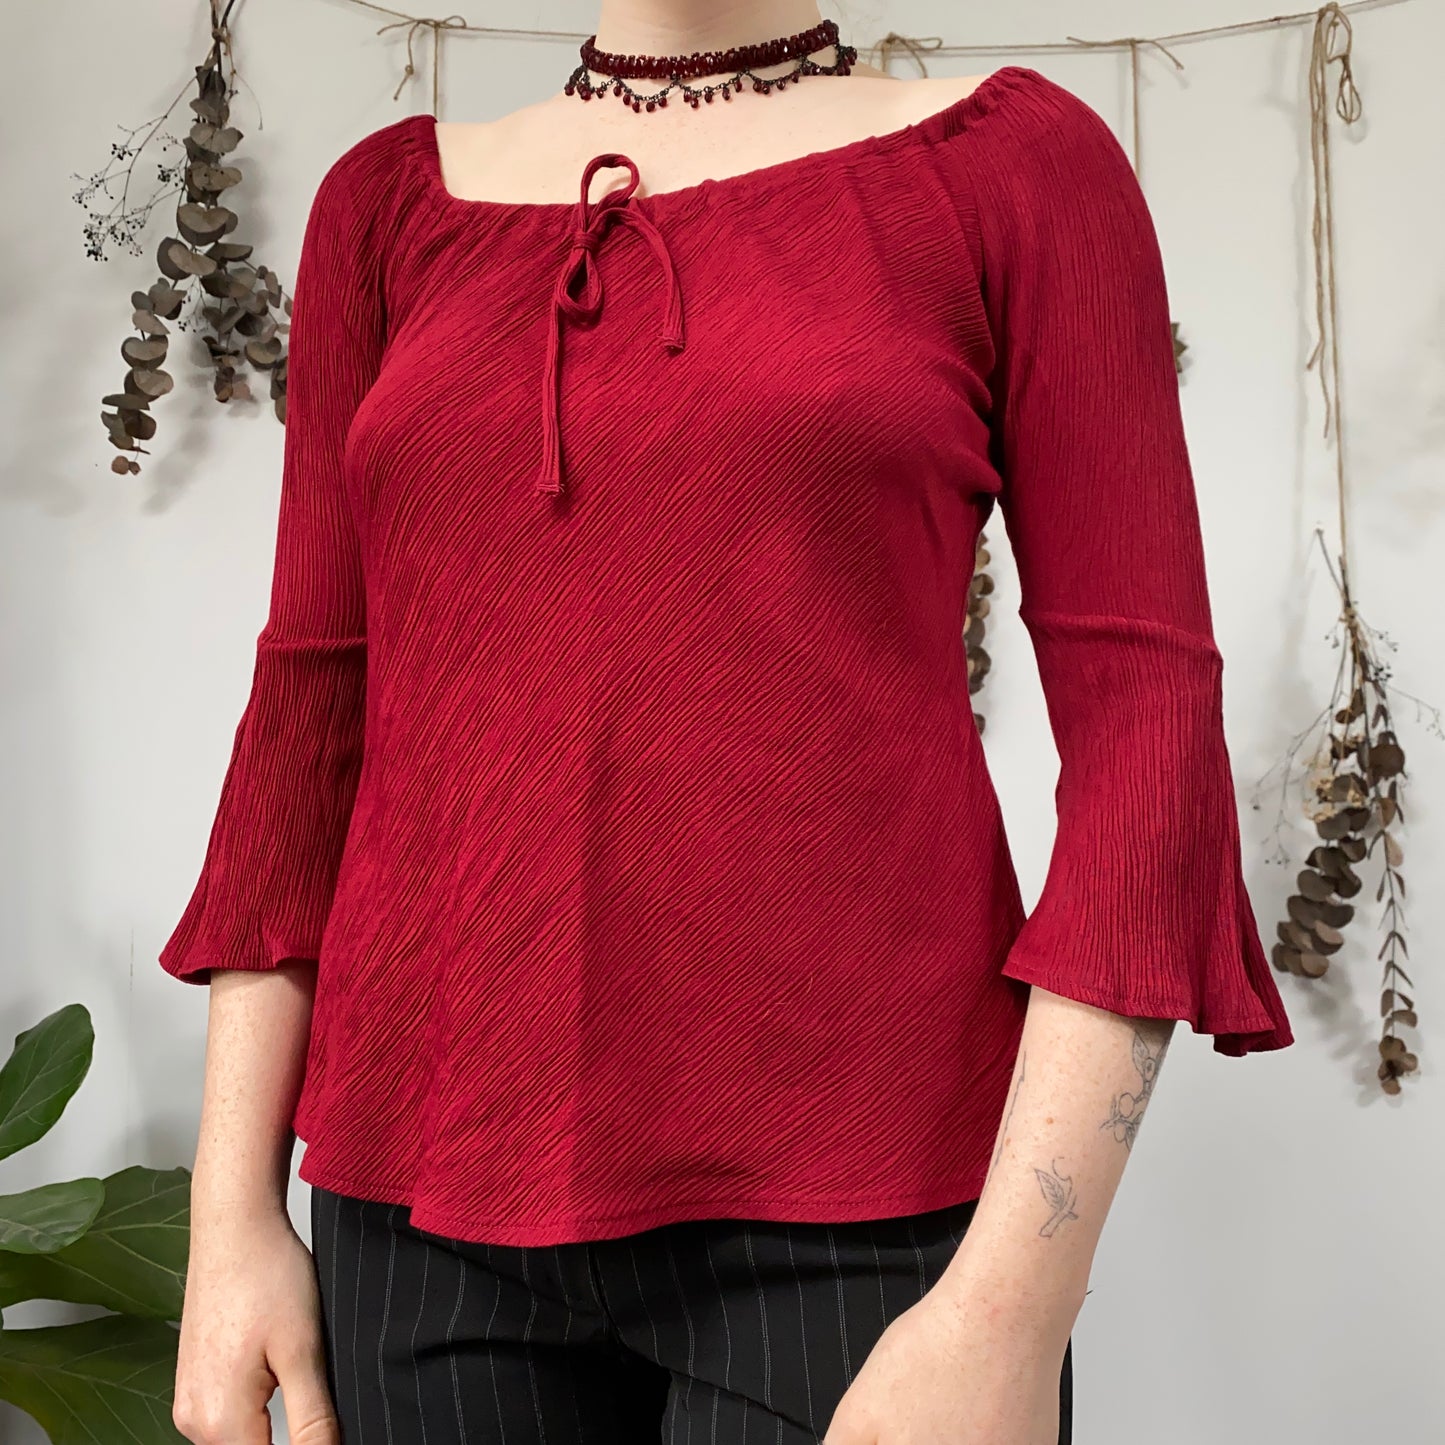 Wine red blouse - size M